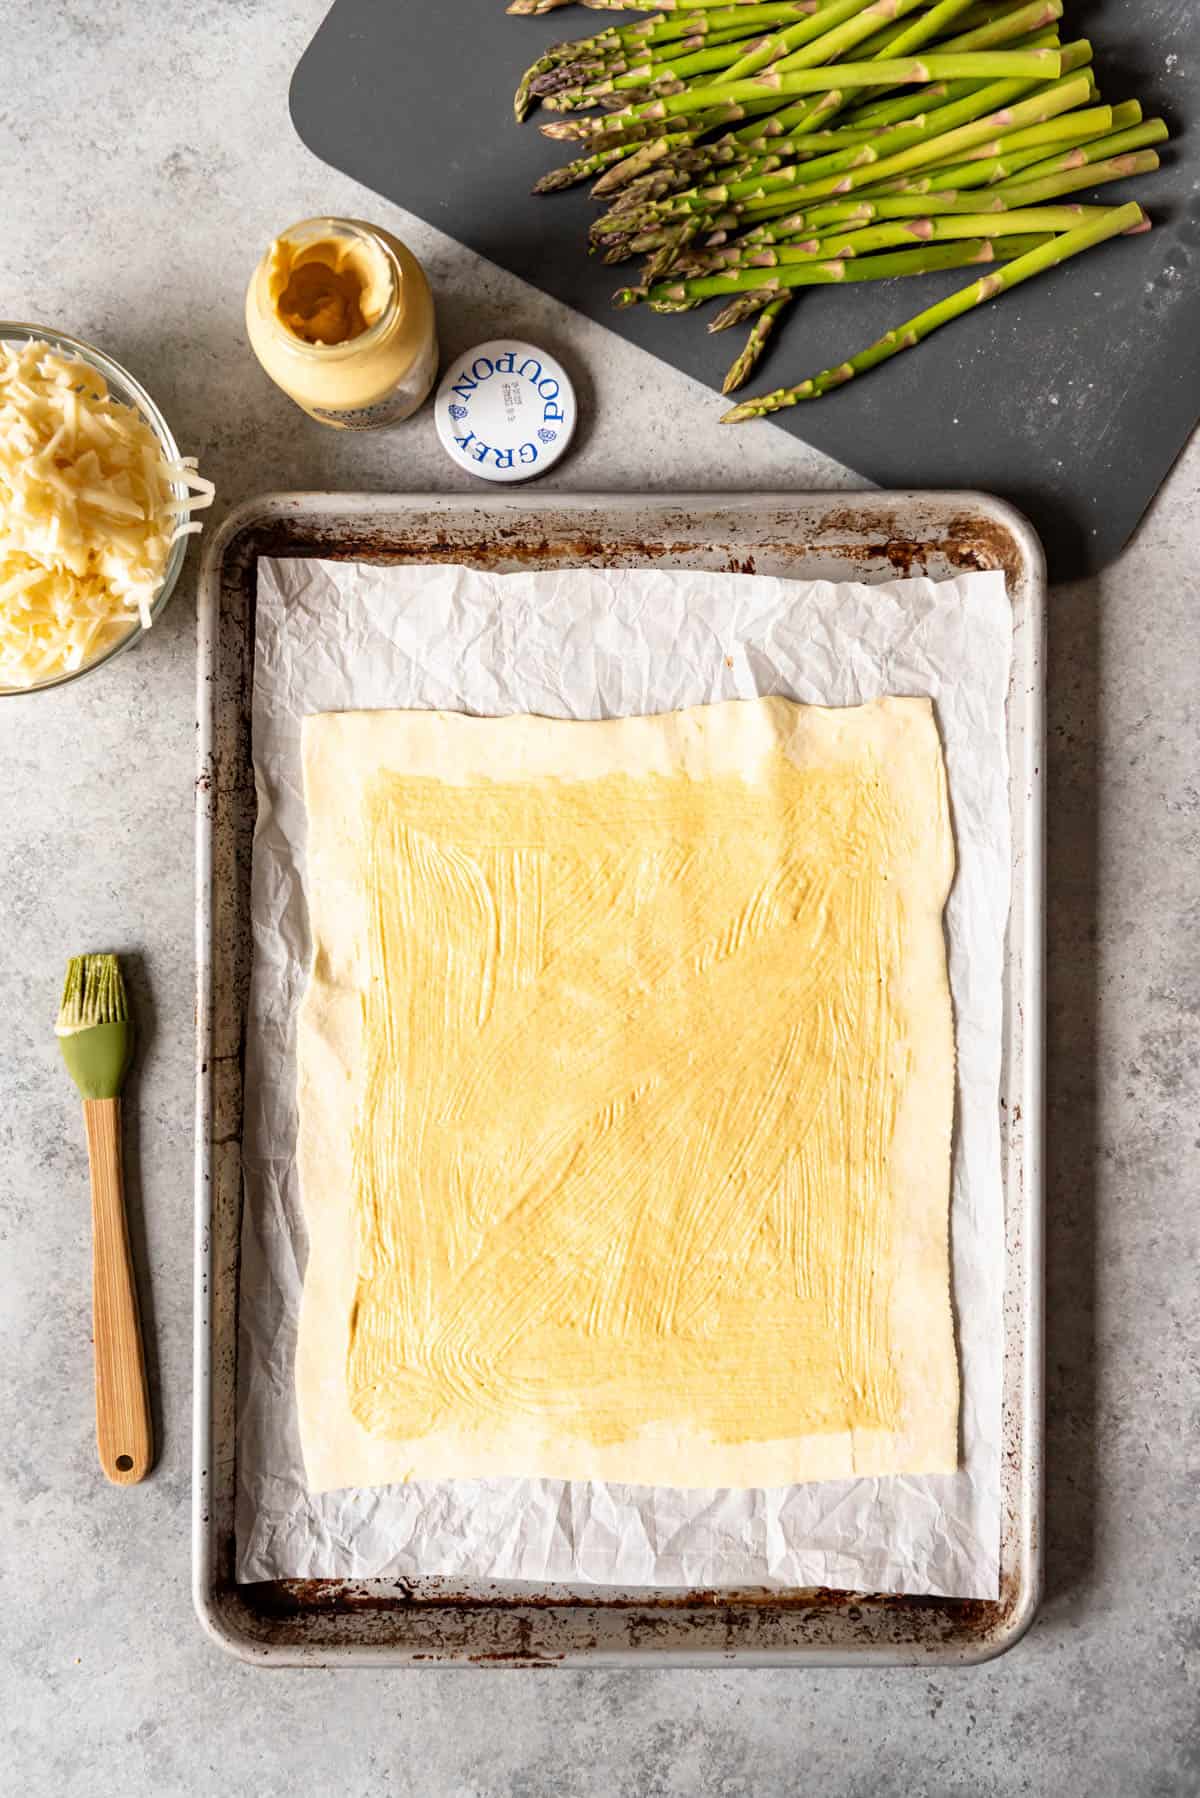 An image of puff pastry brushed with Dijon mustard on a baking sheet lined with parchment paper.